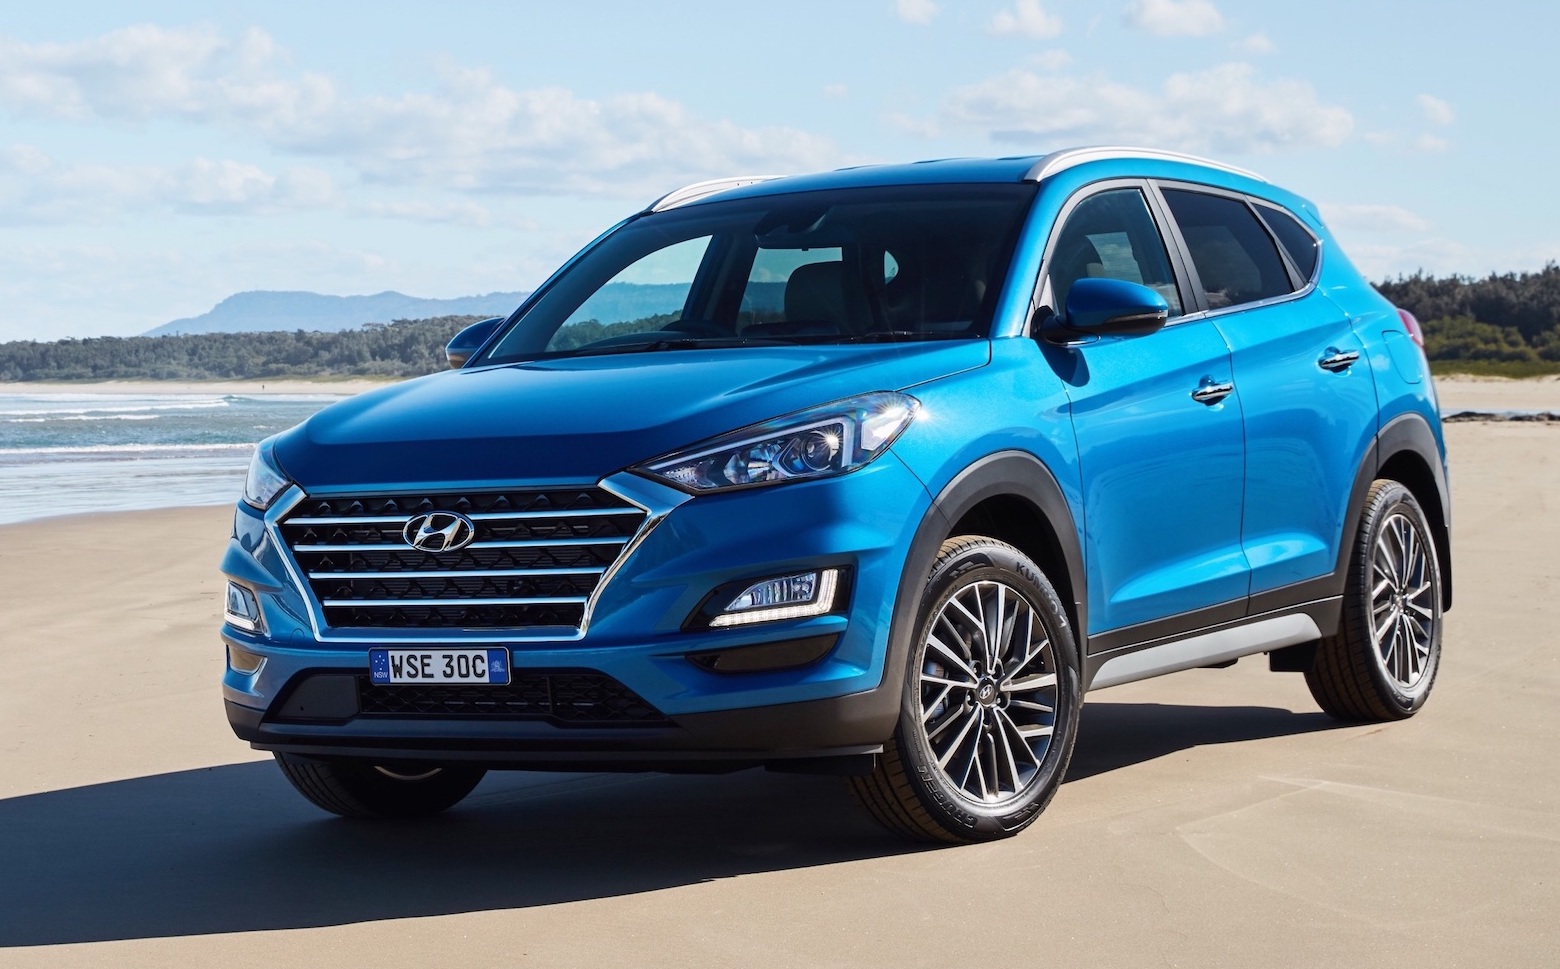 2019 Hyundai Tucson now on sale in Australia from 28,150